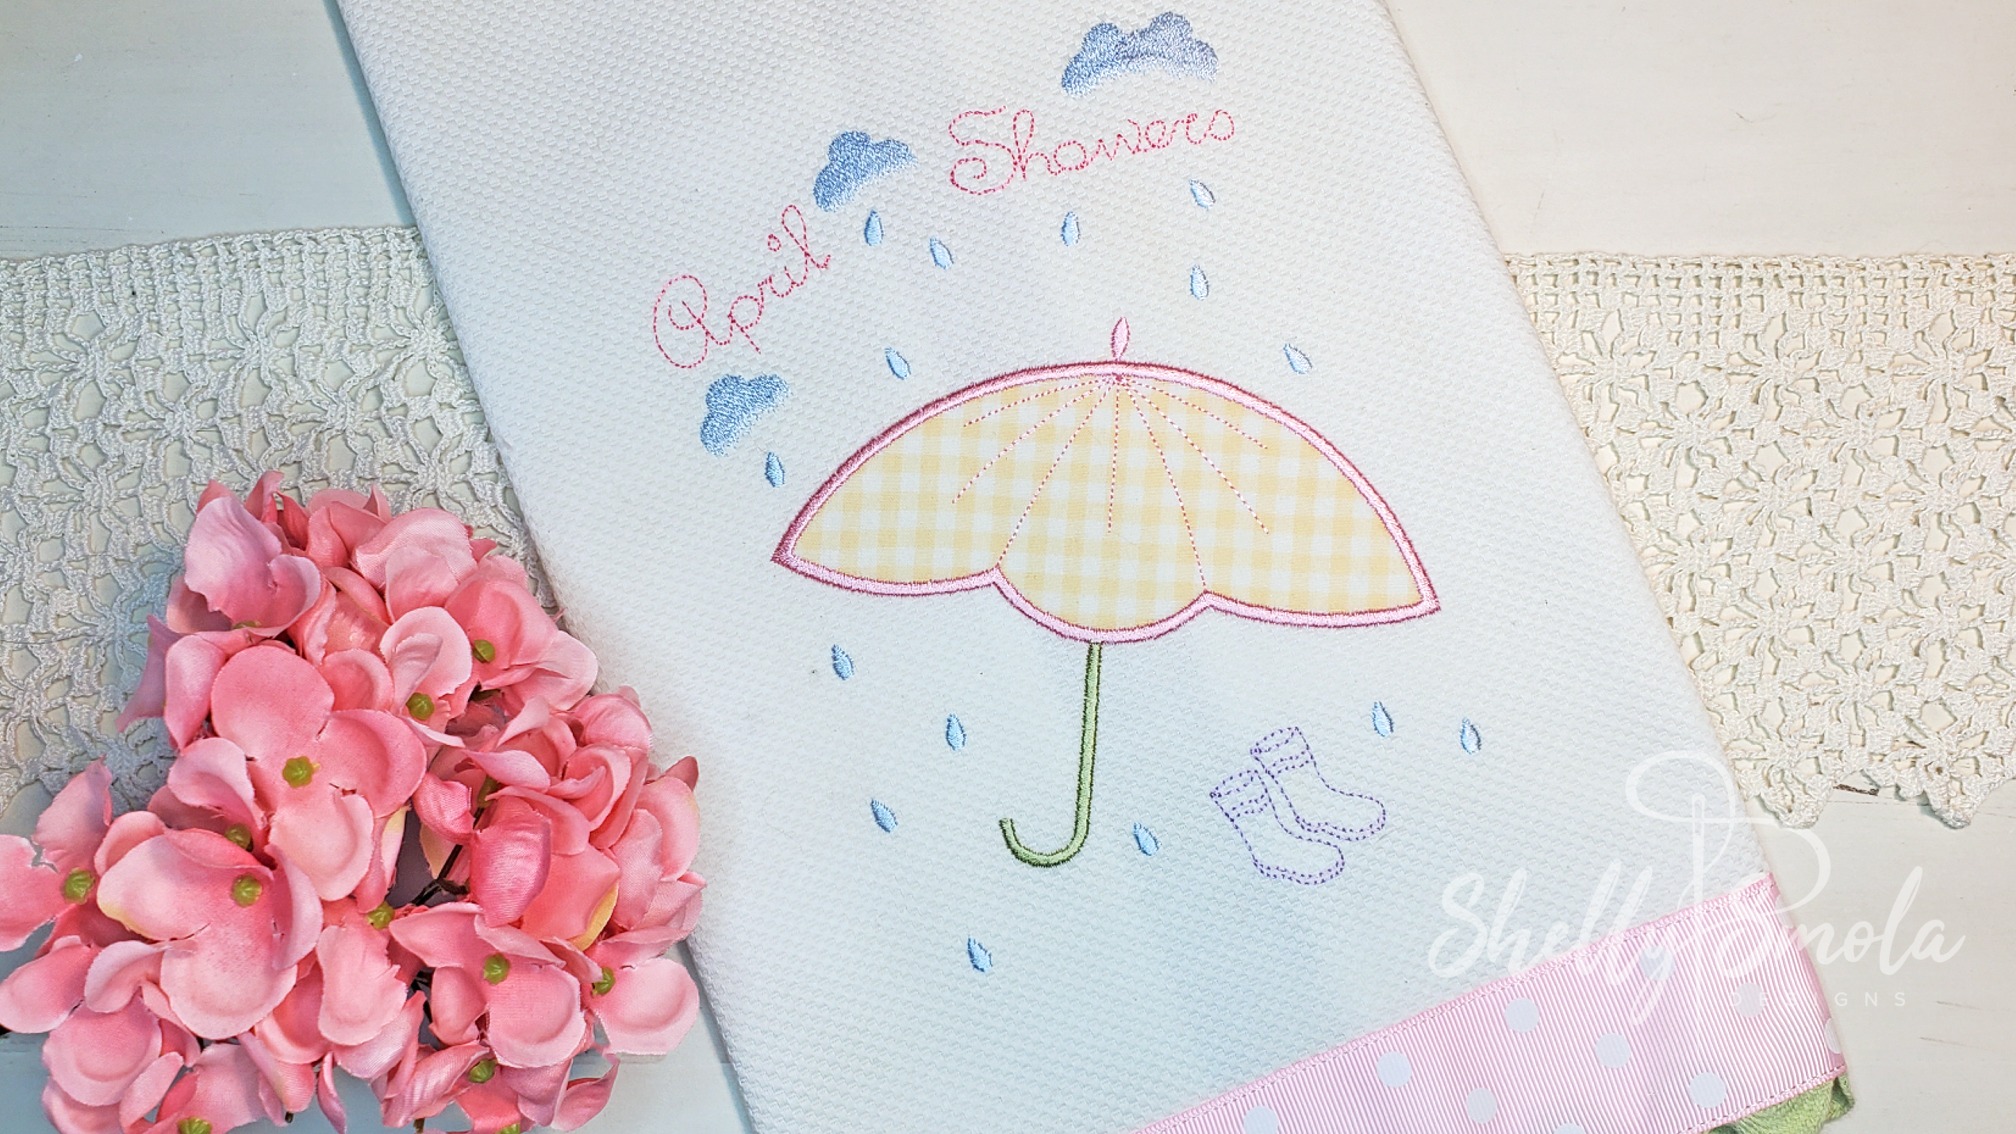 April Showers Tea Towel by Shelly Smola